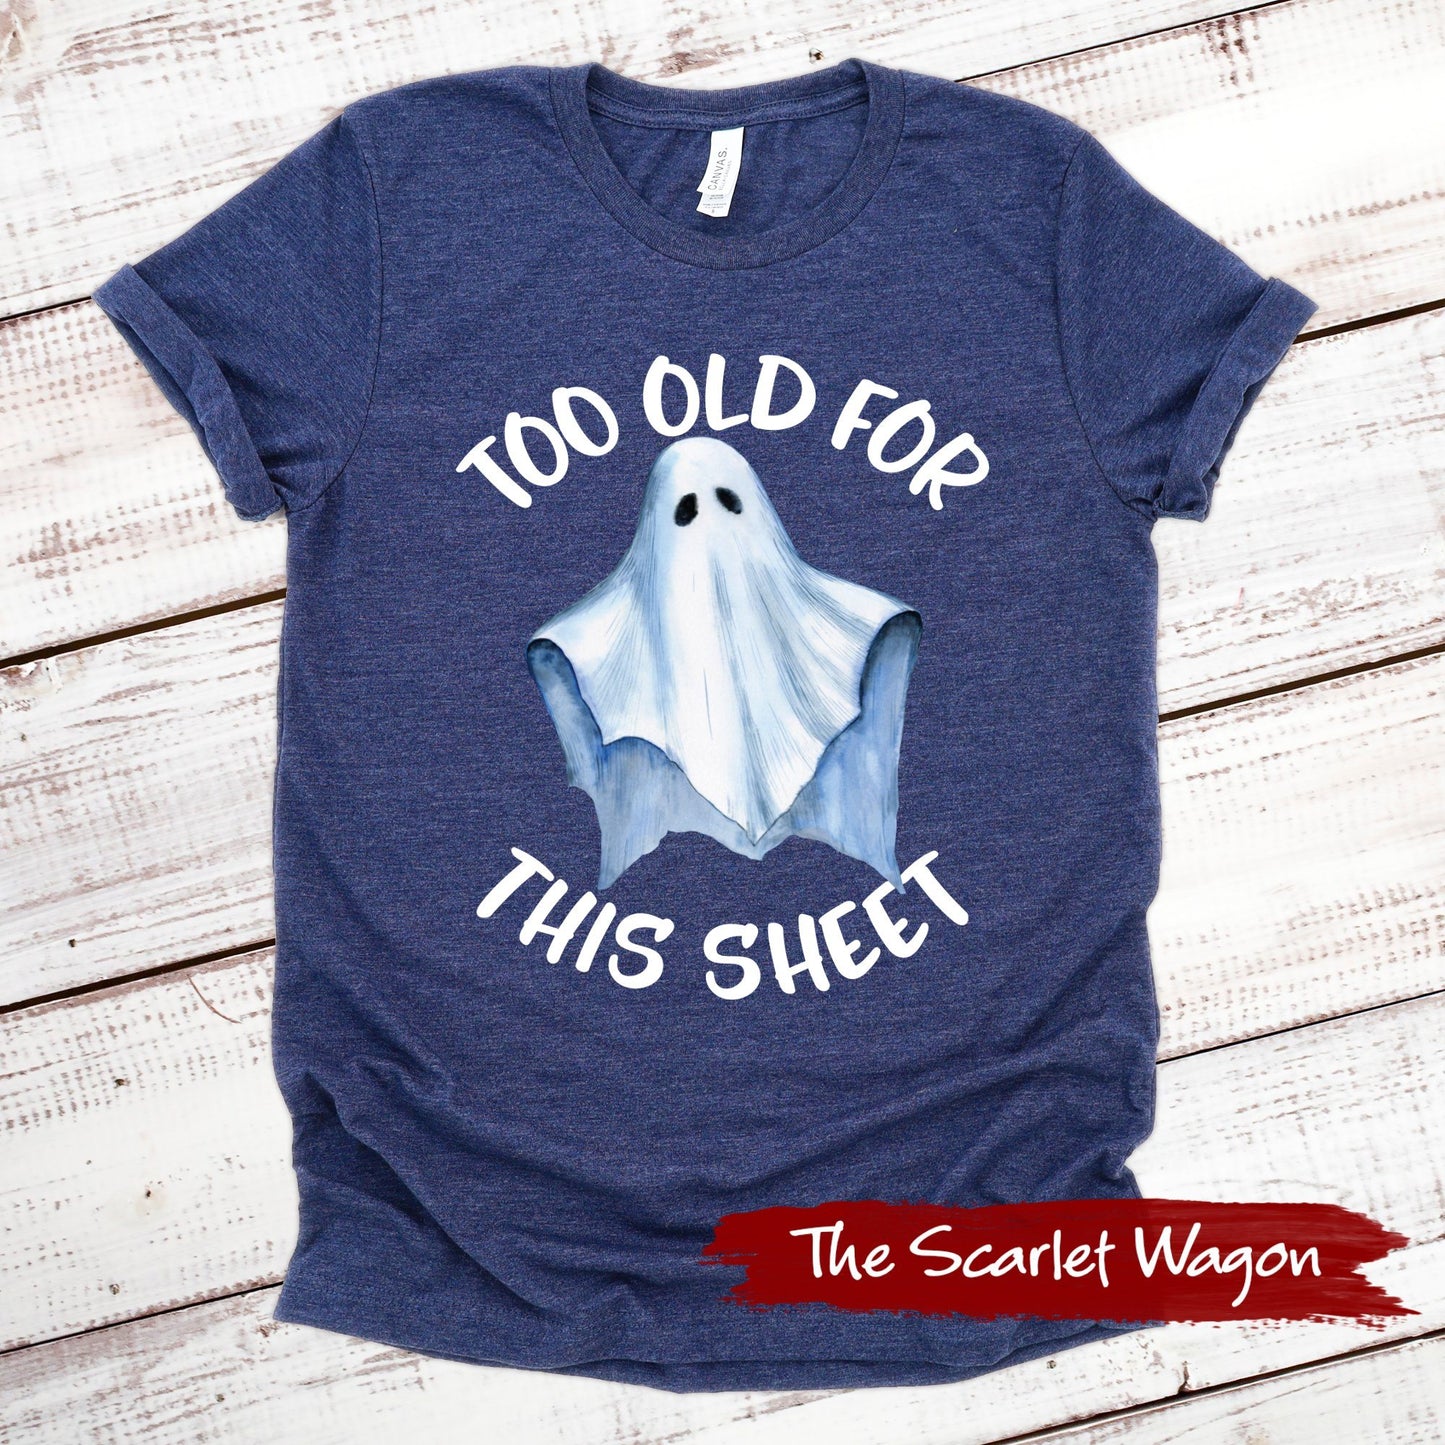 Too Old for This Sheet Halloween Shirt Scarlet Wagon Heather Navy XS 